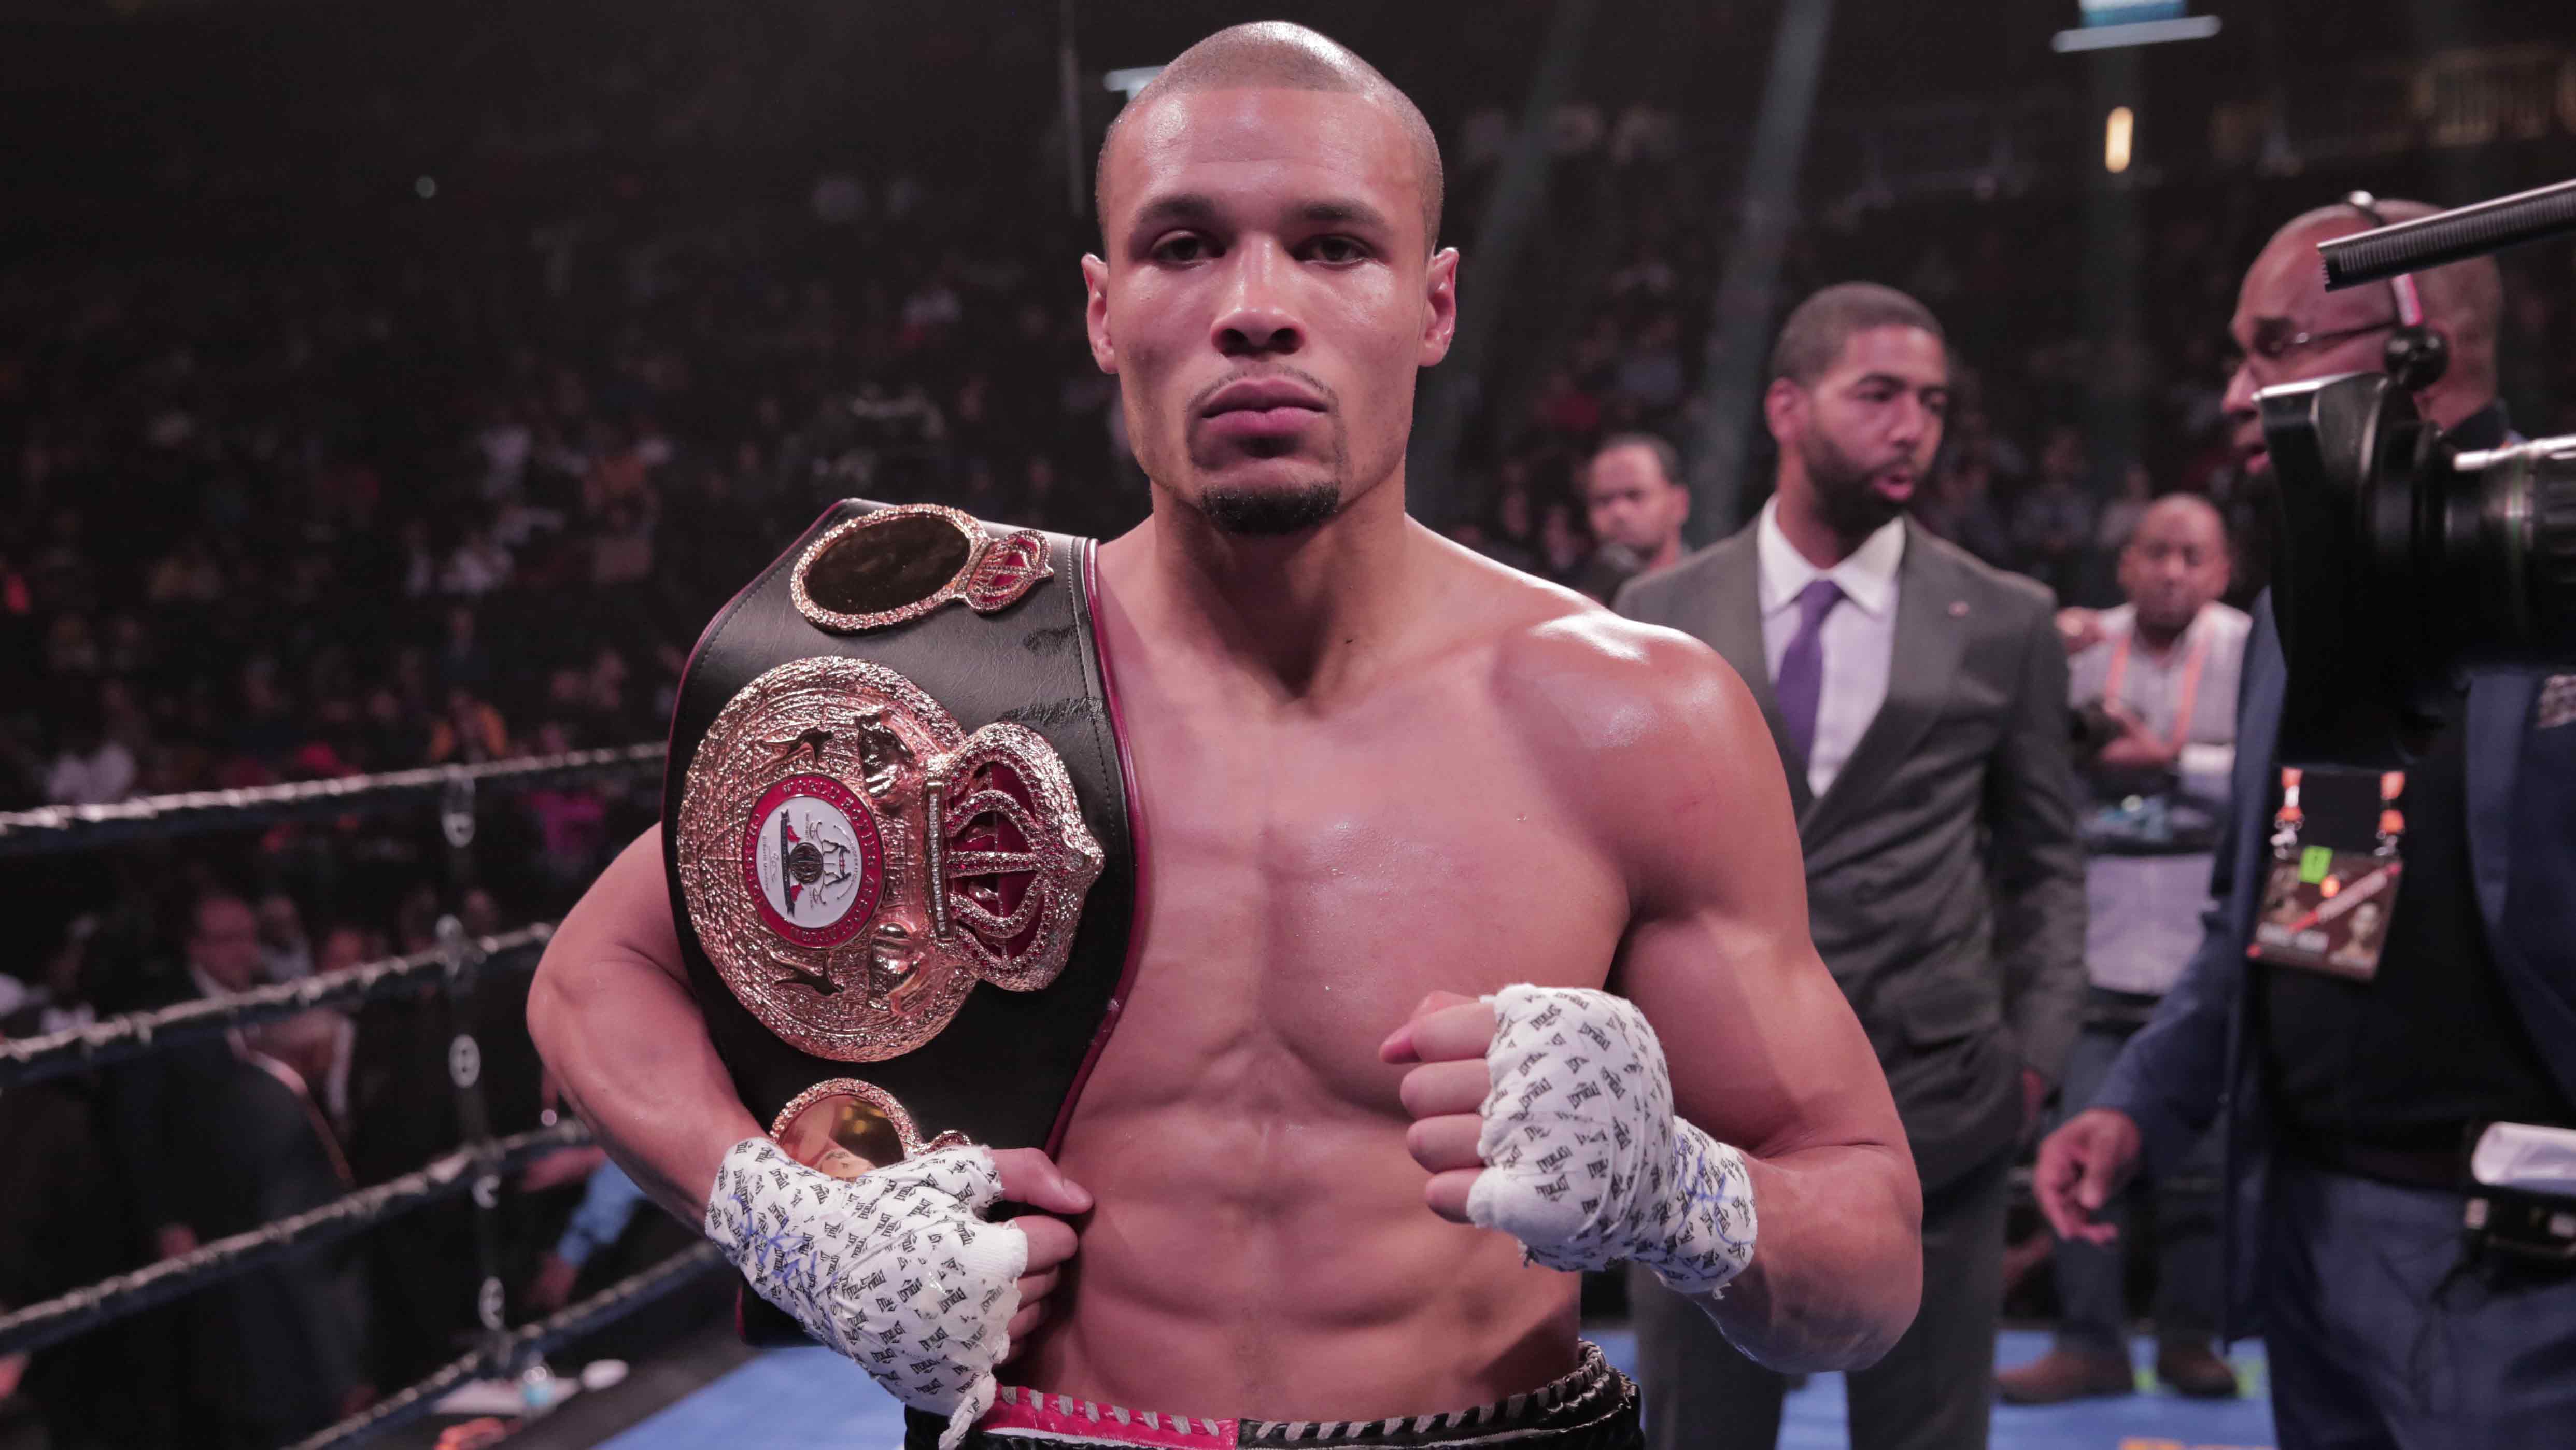 Chris Eubank Jr: “It's do or die – everything is on the line for this  fight